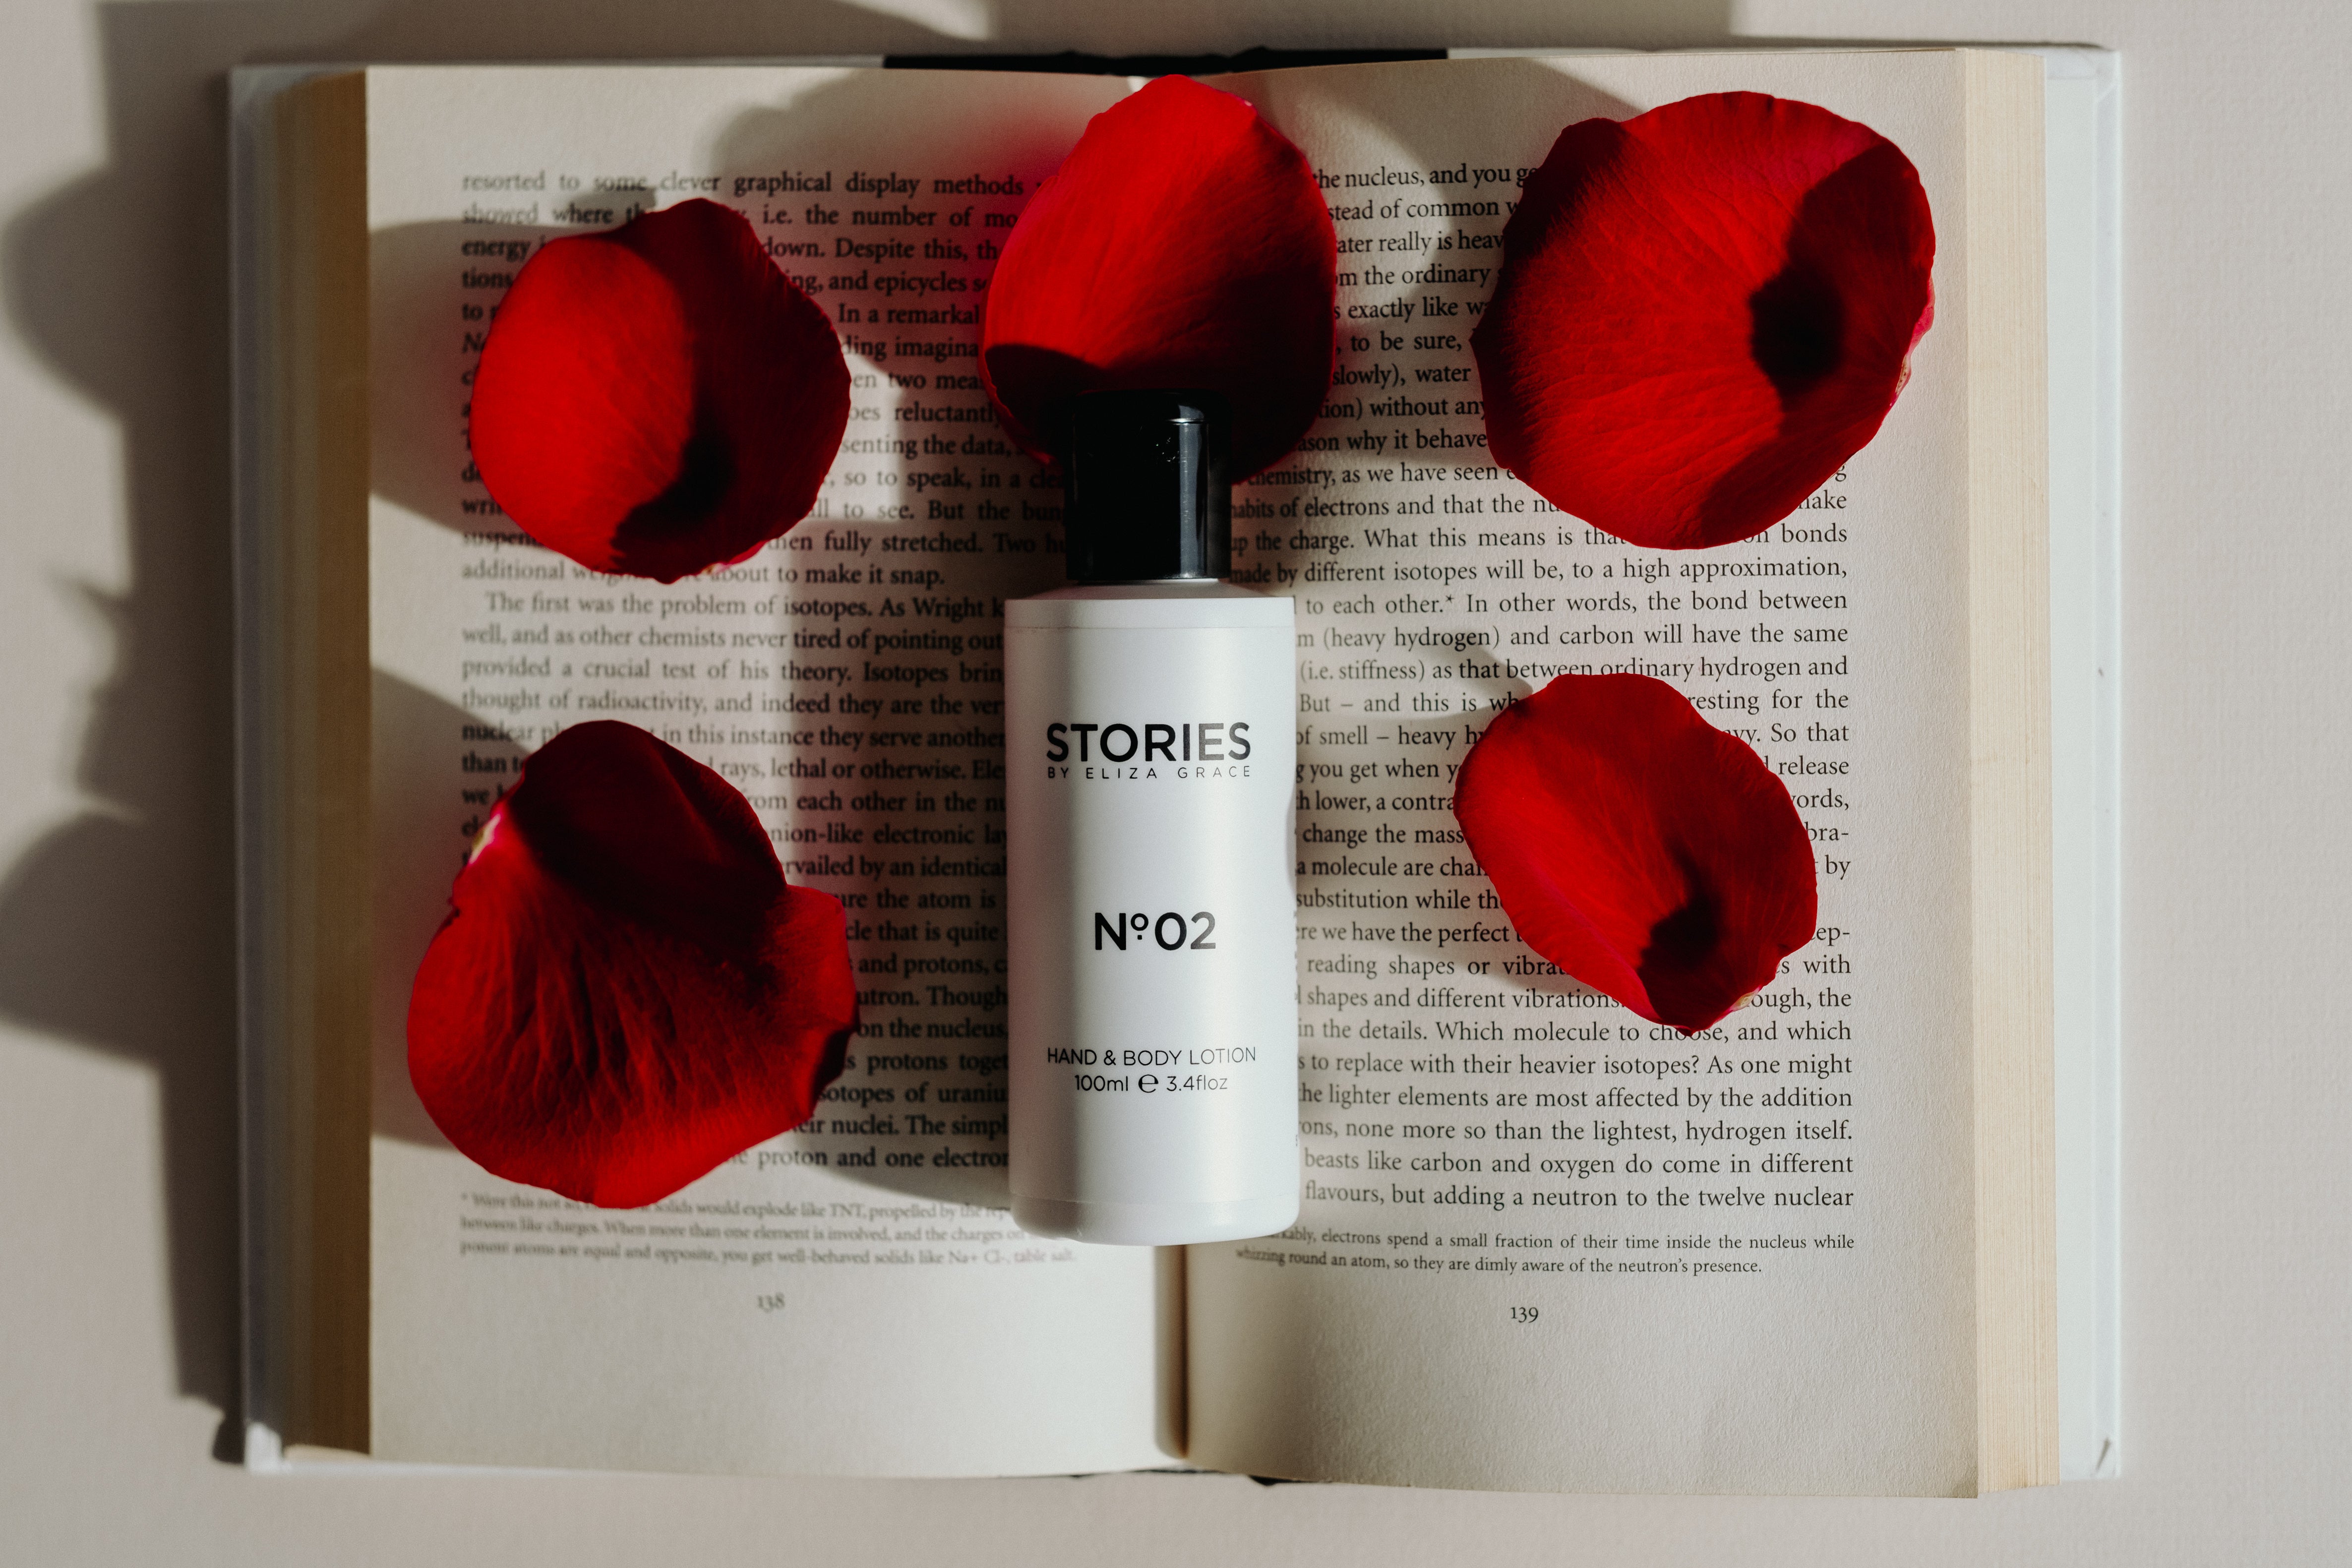 STORIES Parfums Hand and Body Lotion resting on an open book surrounded by red rose petals